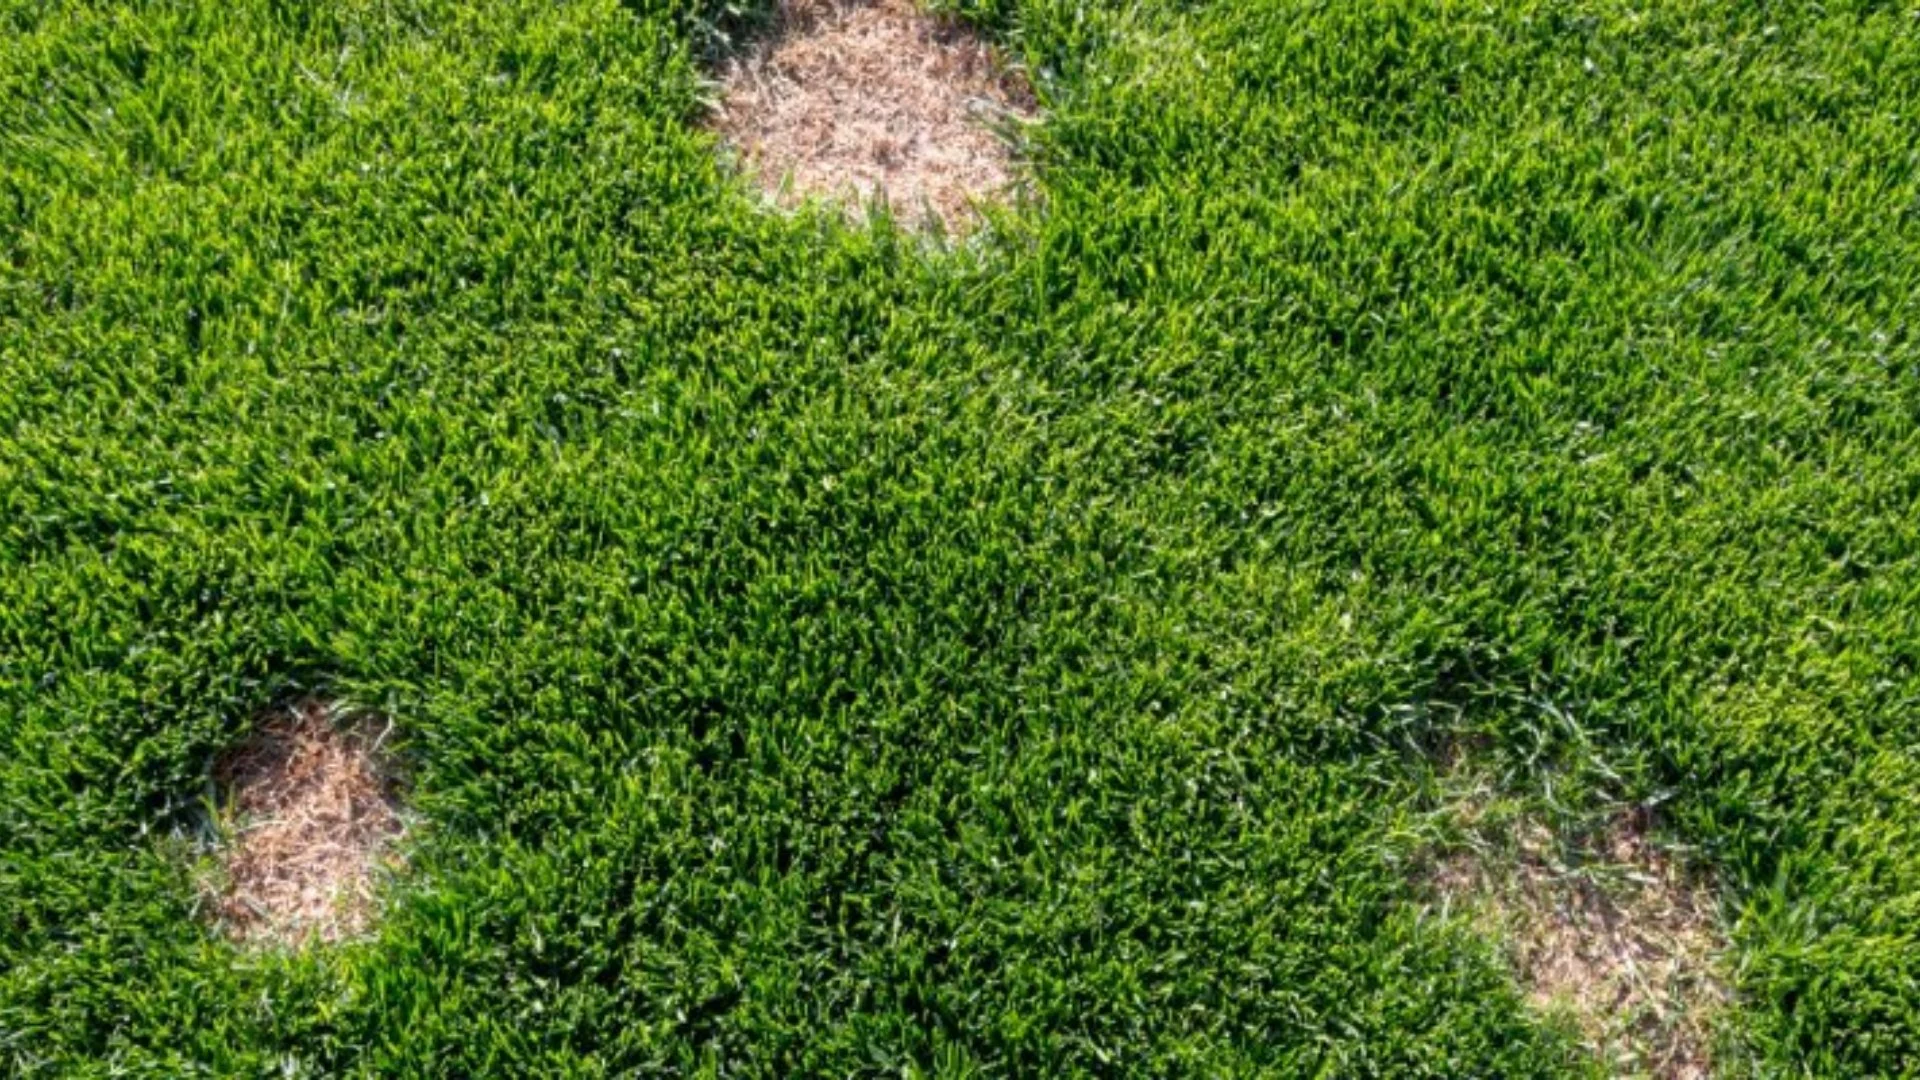 Dollar Spot - A Lawn Disease You Should Be on the Lookout for in Texas